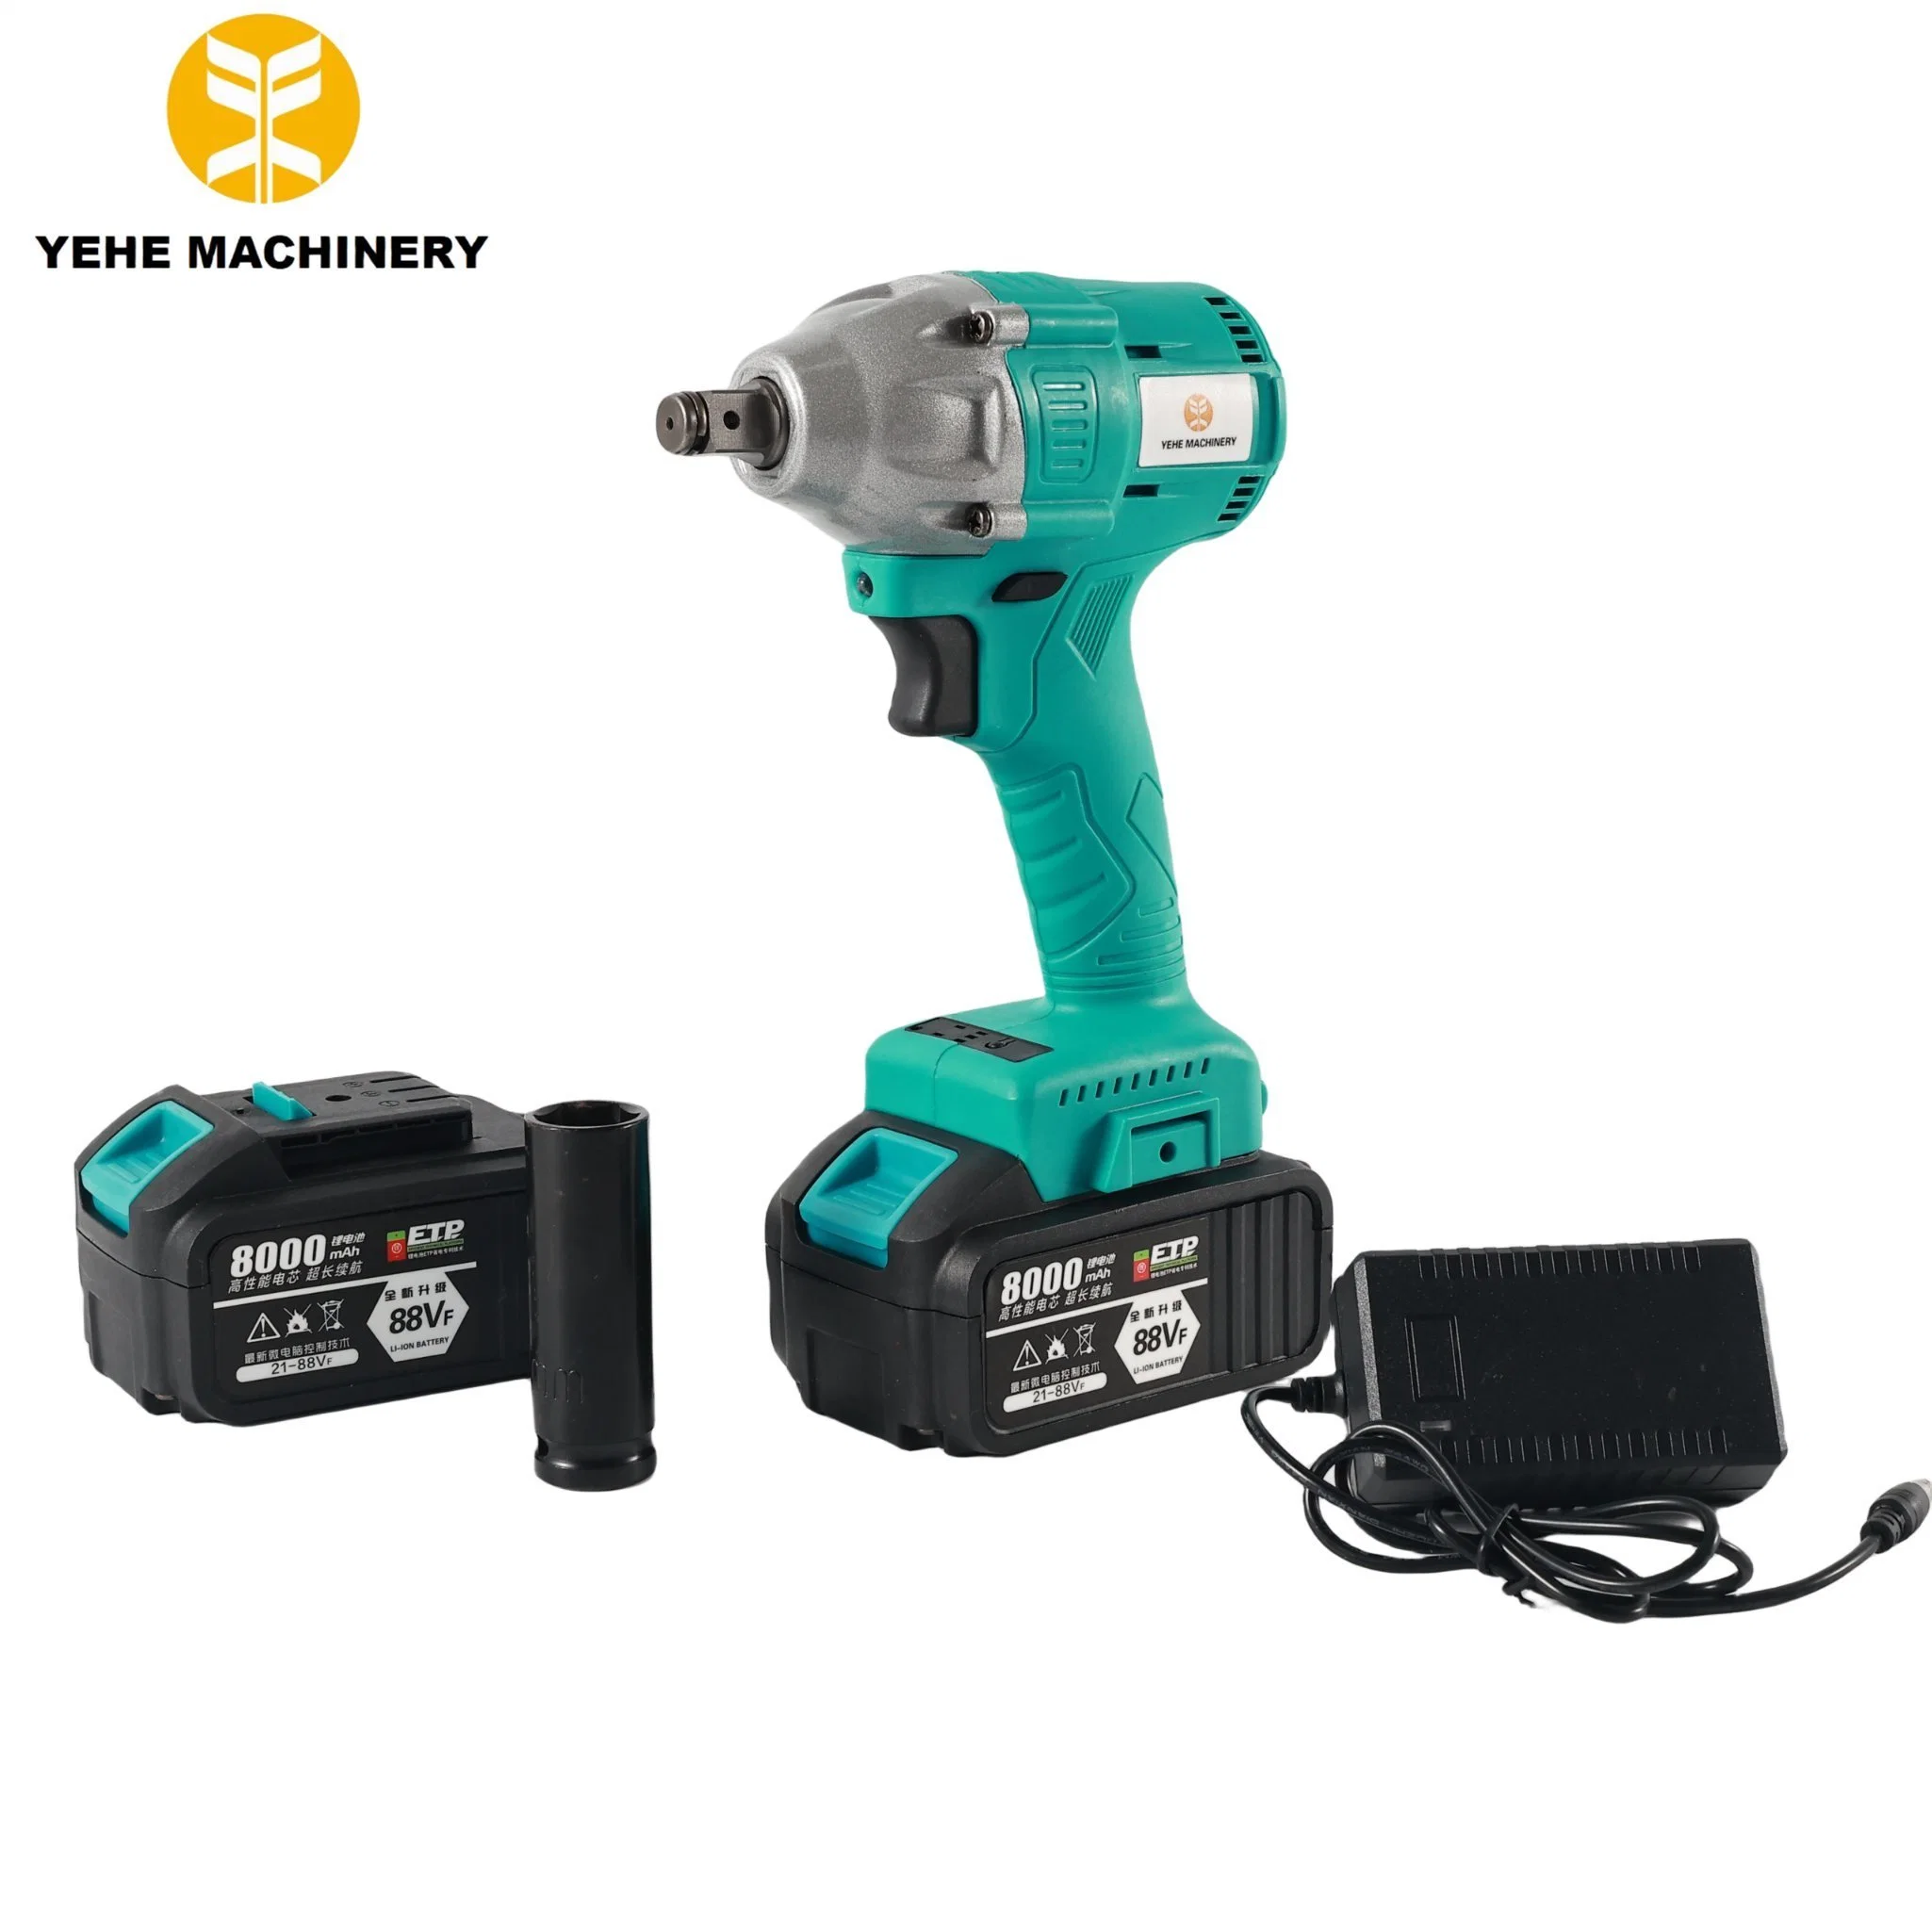 Power Action Brushless 20V Double Hardware Speed Electric Cordless Drill Hammer Drill Screwdriver Grinder Repair Air Impact Wrench Tool